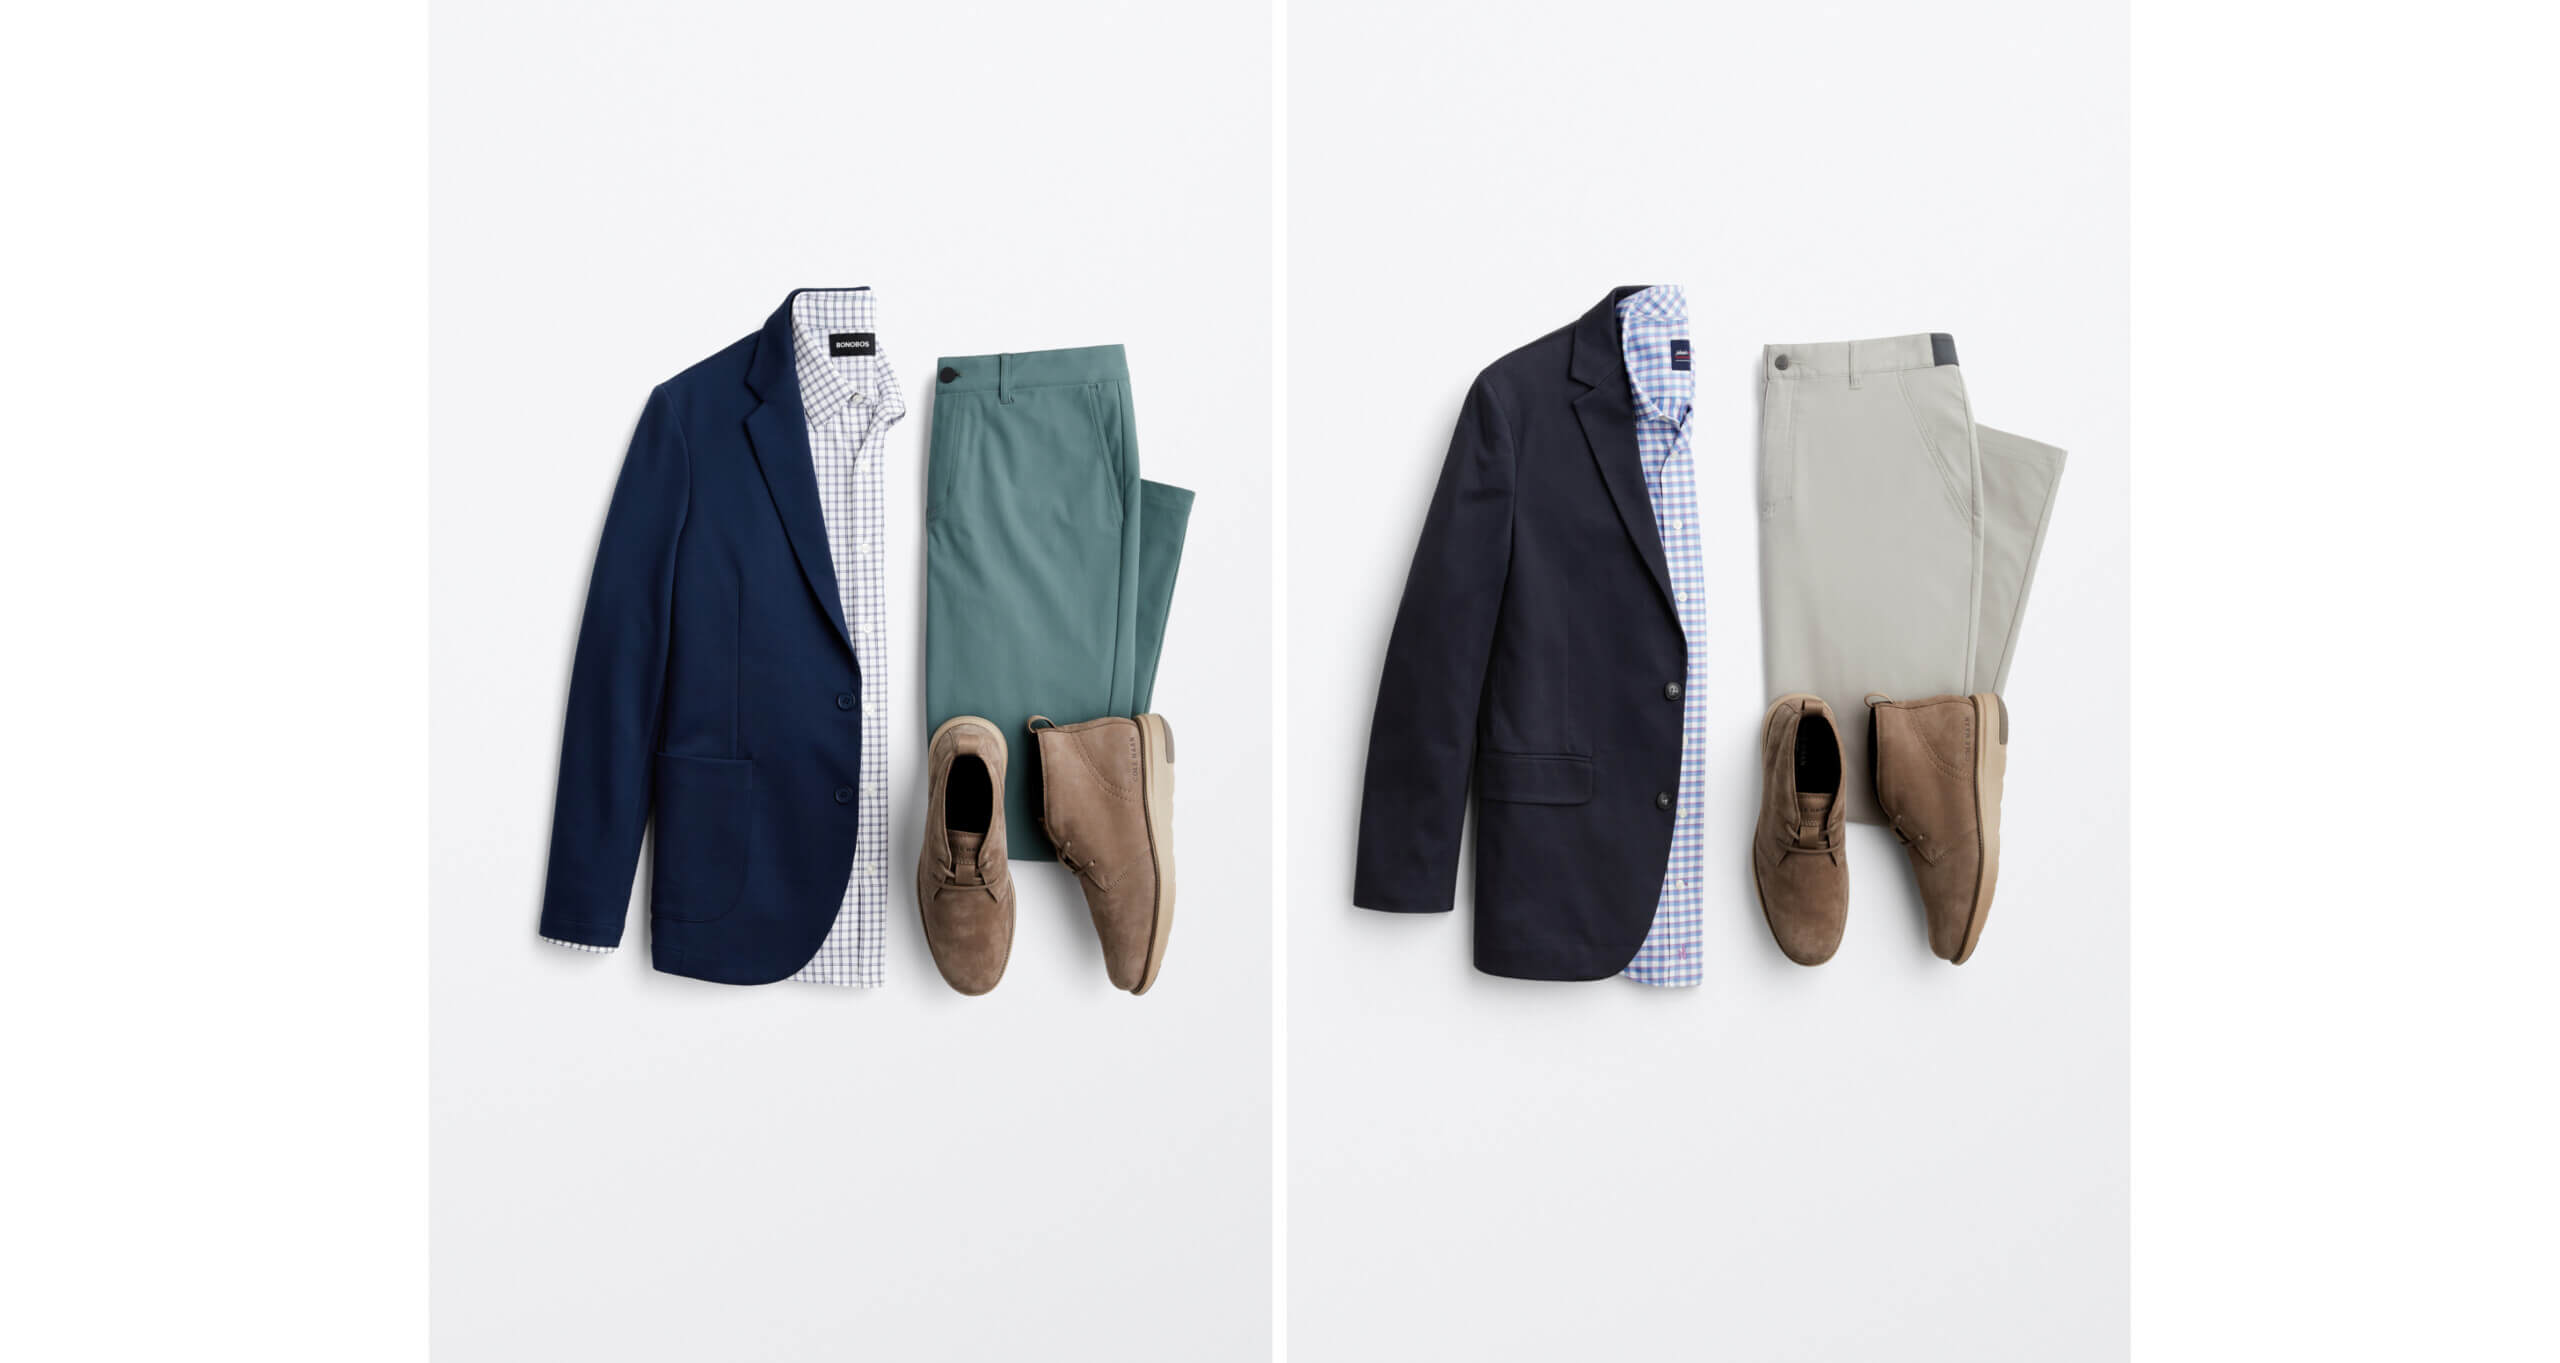 On the left, a flatlay of mint green chinos, tan chukka boots, a white and blue checked dress shirt, and a navy blue sport coat. On the right, a flatlay of tan chinos, tan chukka boots, a blue and white checked dress shirt, and a black blazer. 